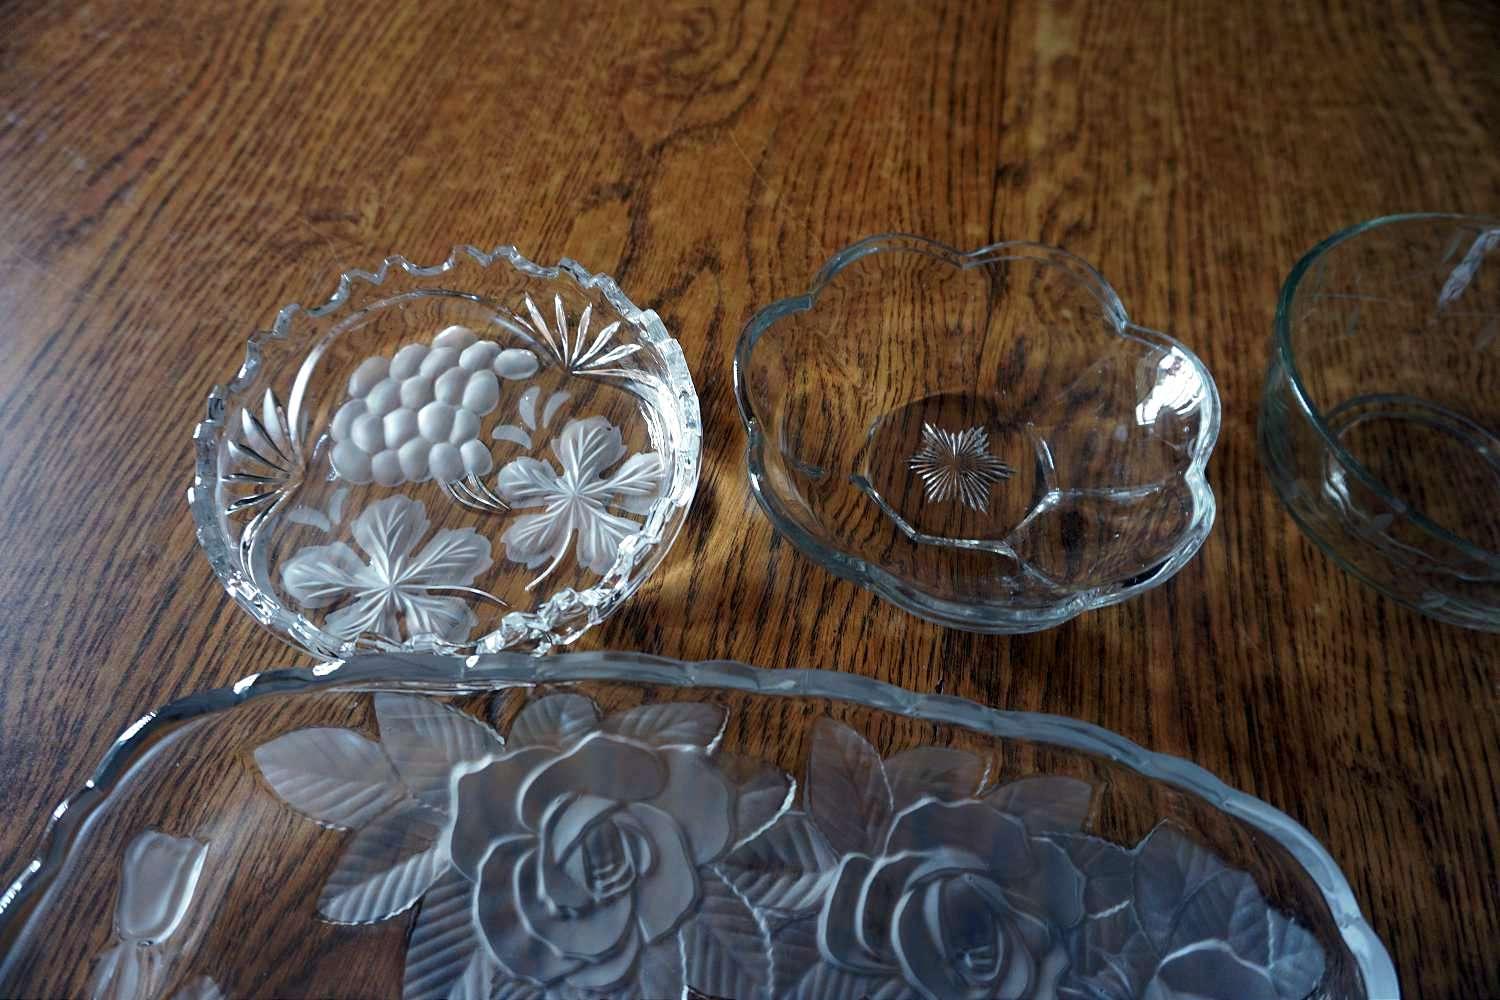 Rose cut glass and other Clear glass serving dishes.